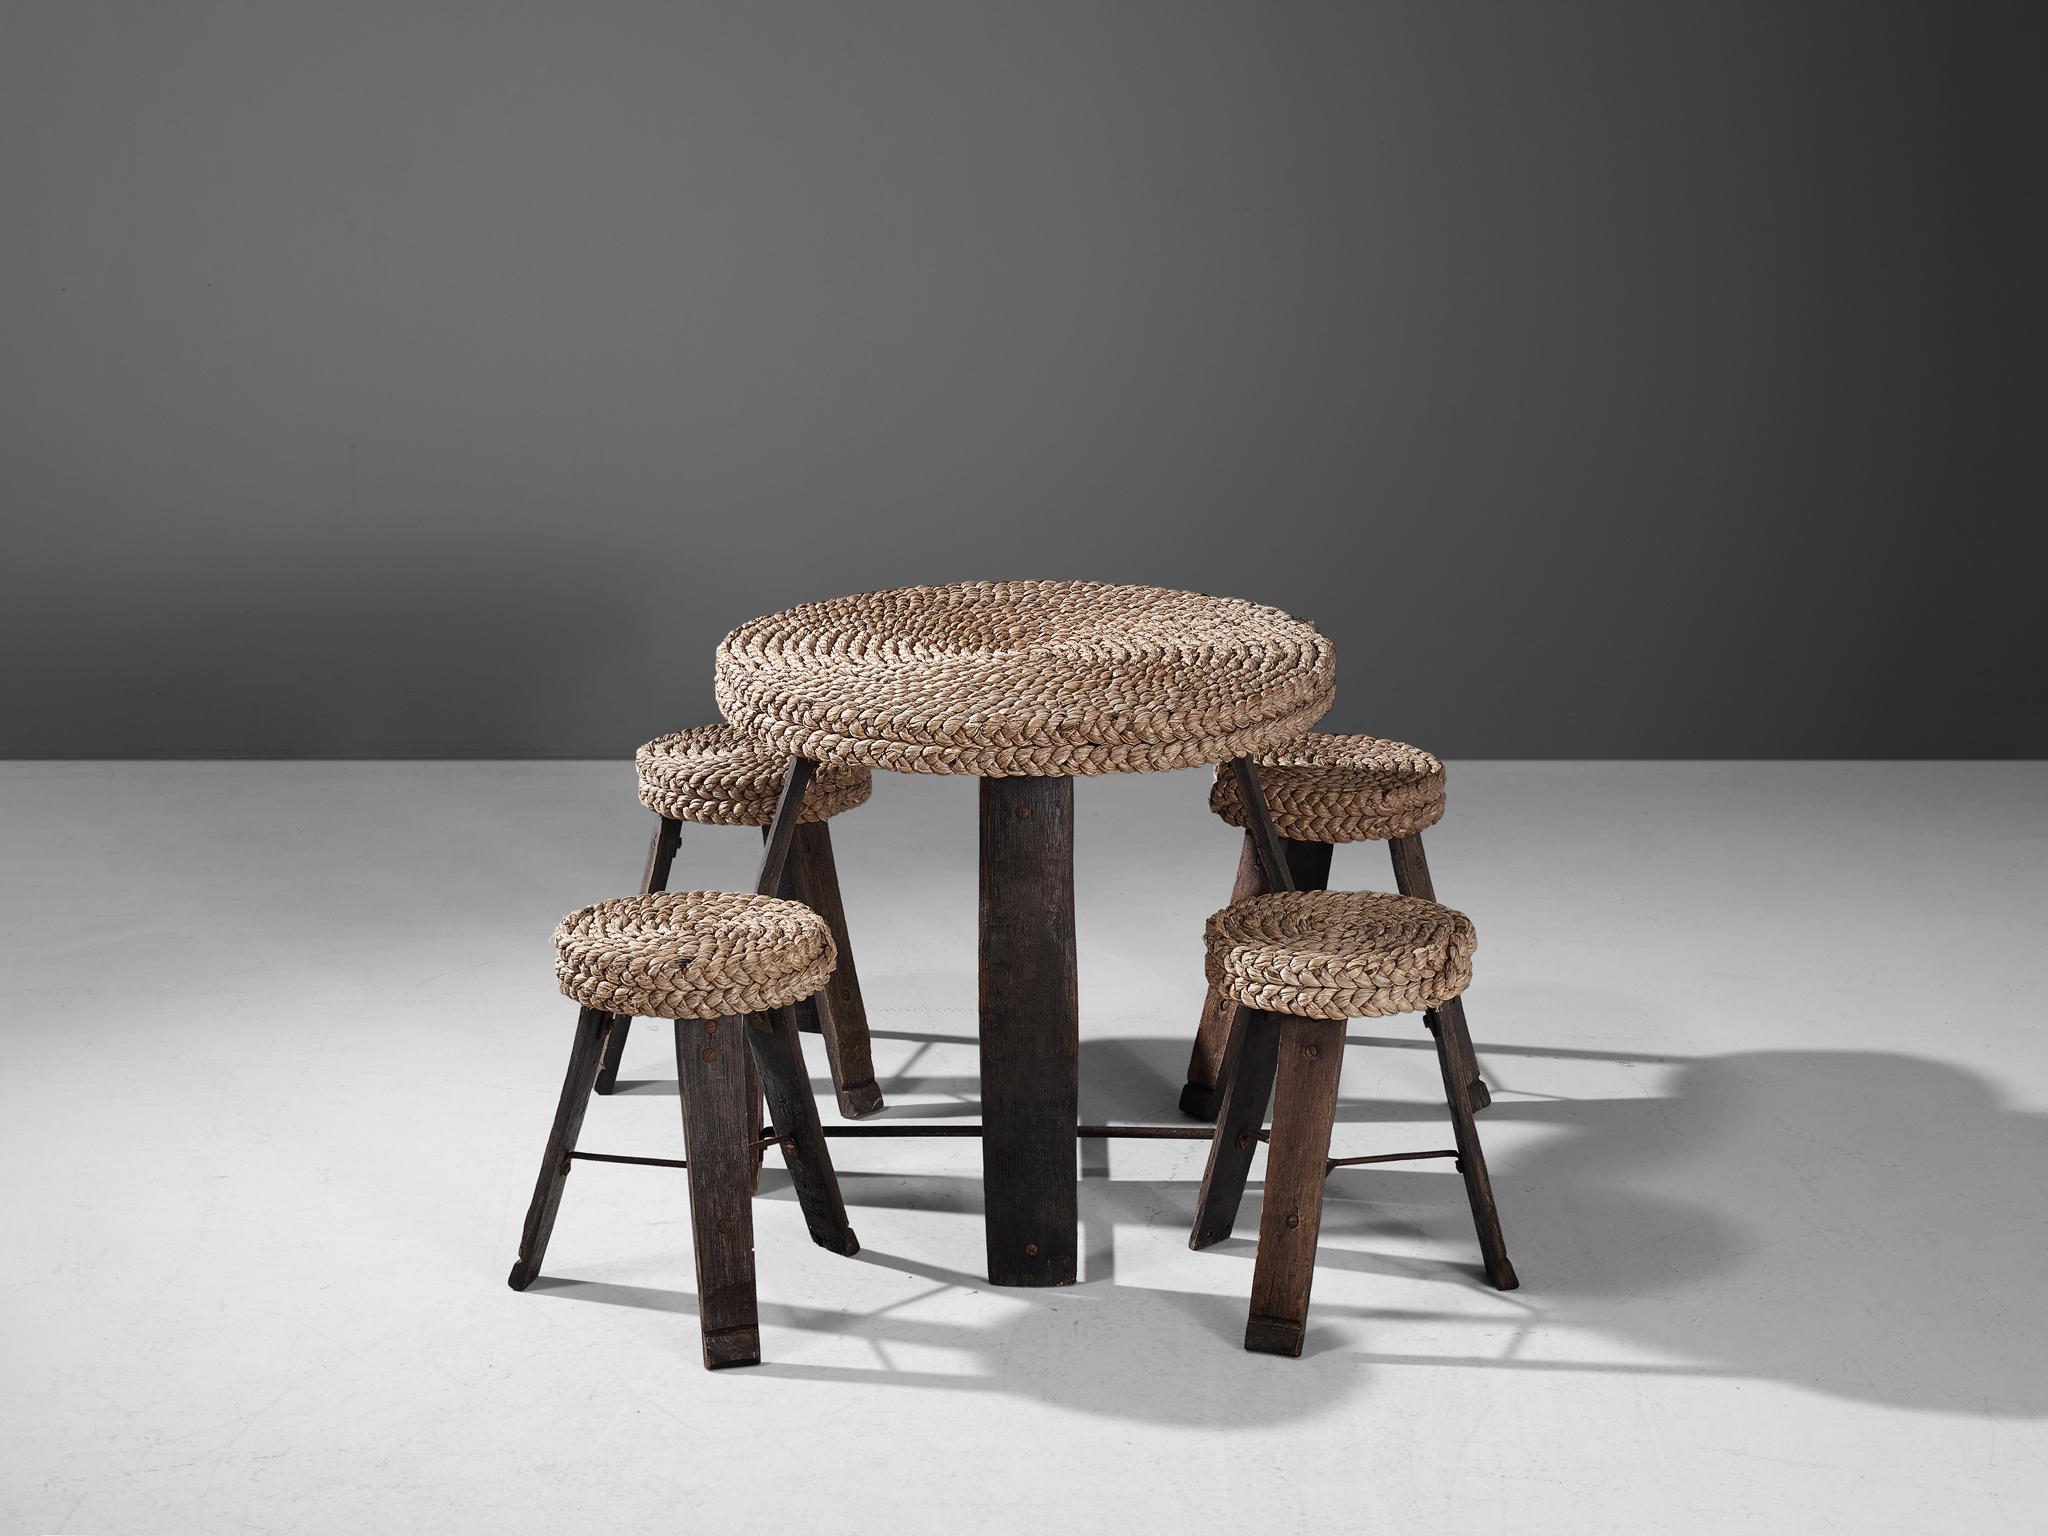 Adrien Audoux and Frida Minet, set of table and four stools, oak, straw, France, 1950s.

This rare set was created by the French designer couple Adrien Audoux and Frida Minet. 

The legs of the table are made of dark oak. The wood was originally